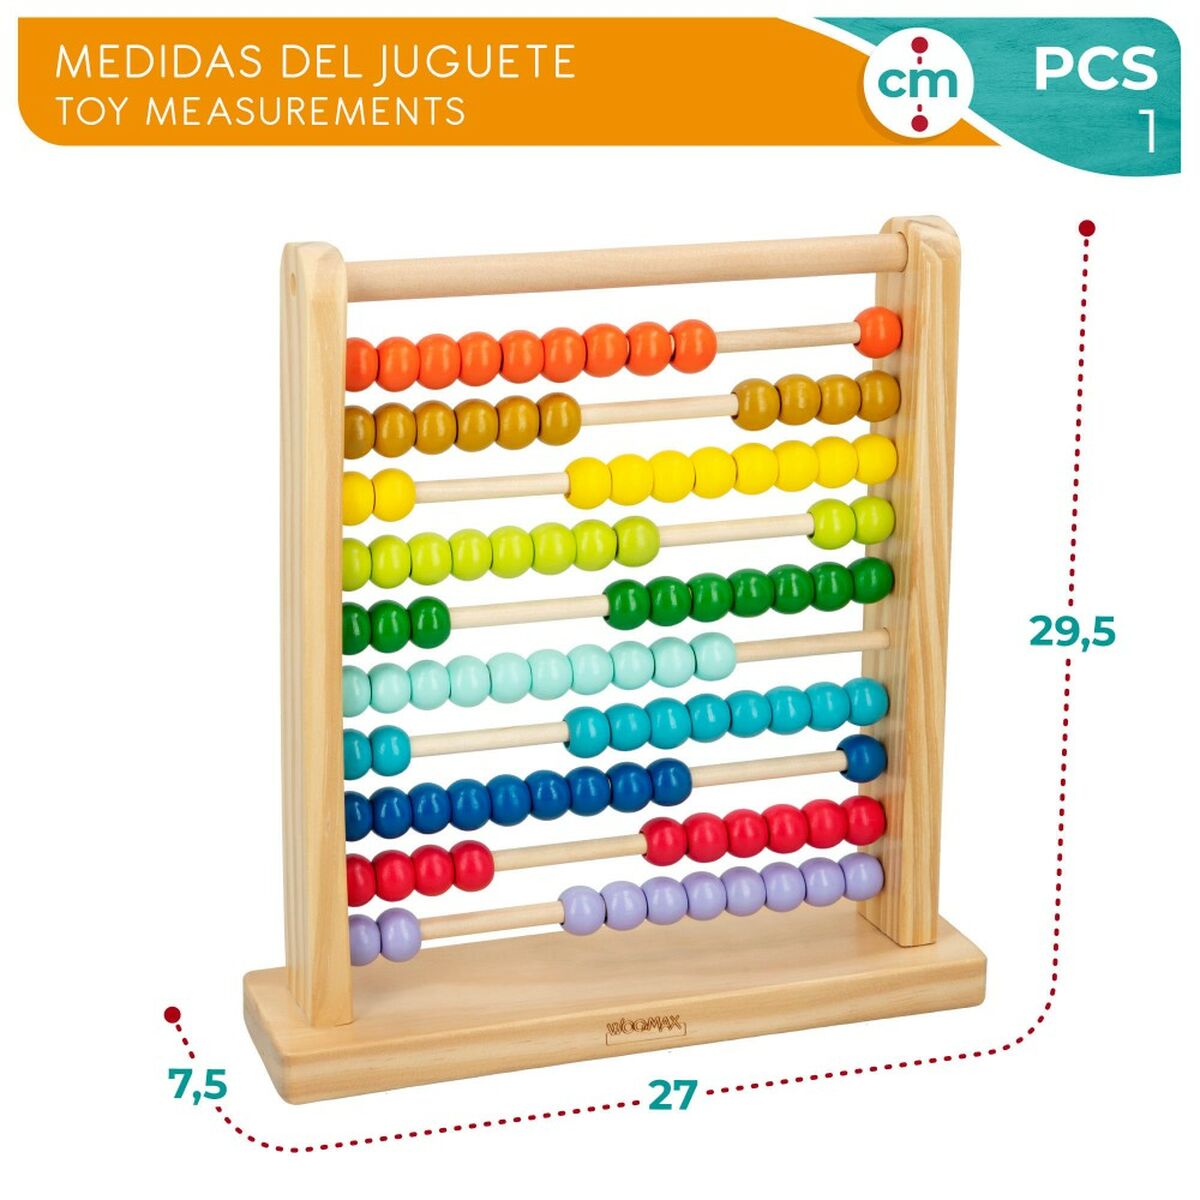 Wooden Abacus Woomax + 12 Months (6 Units)